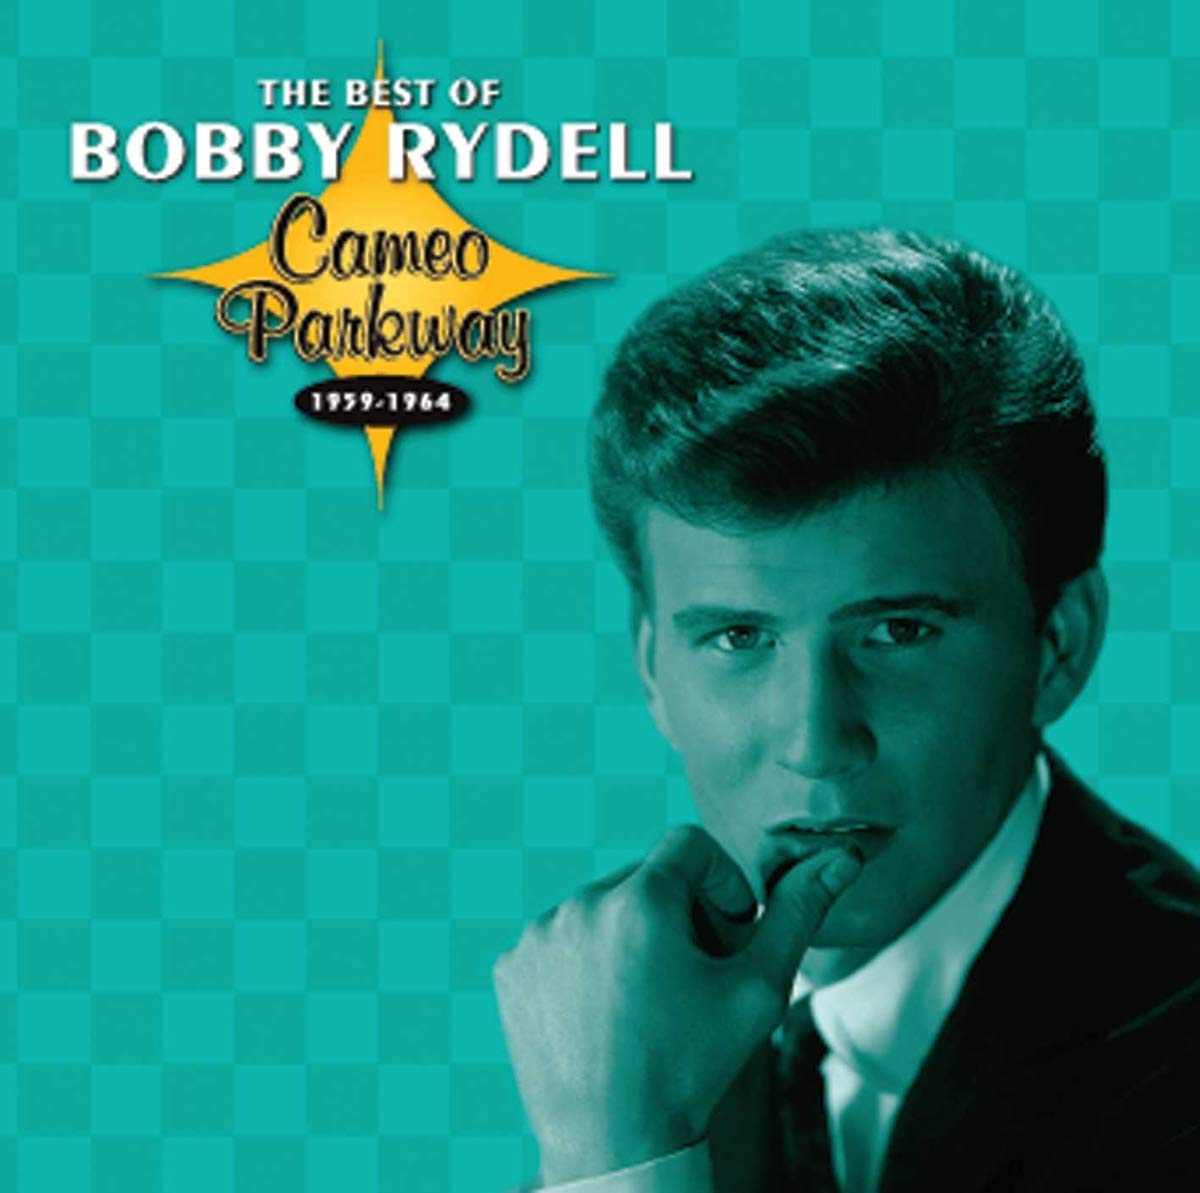 The early years - The Best of Bobby Rydell